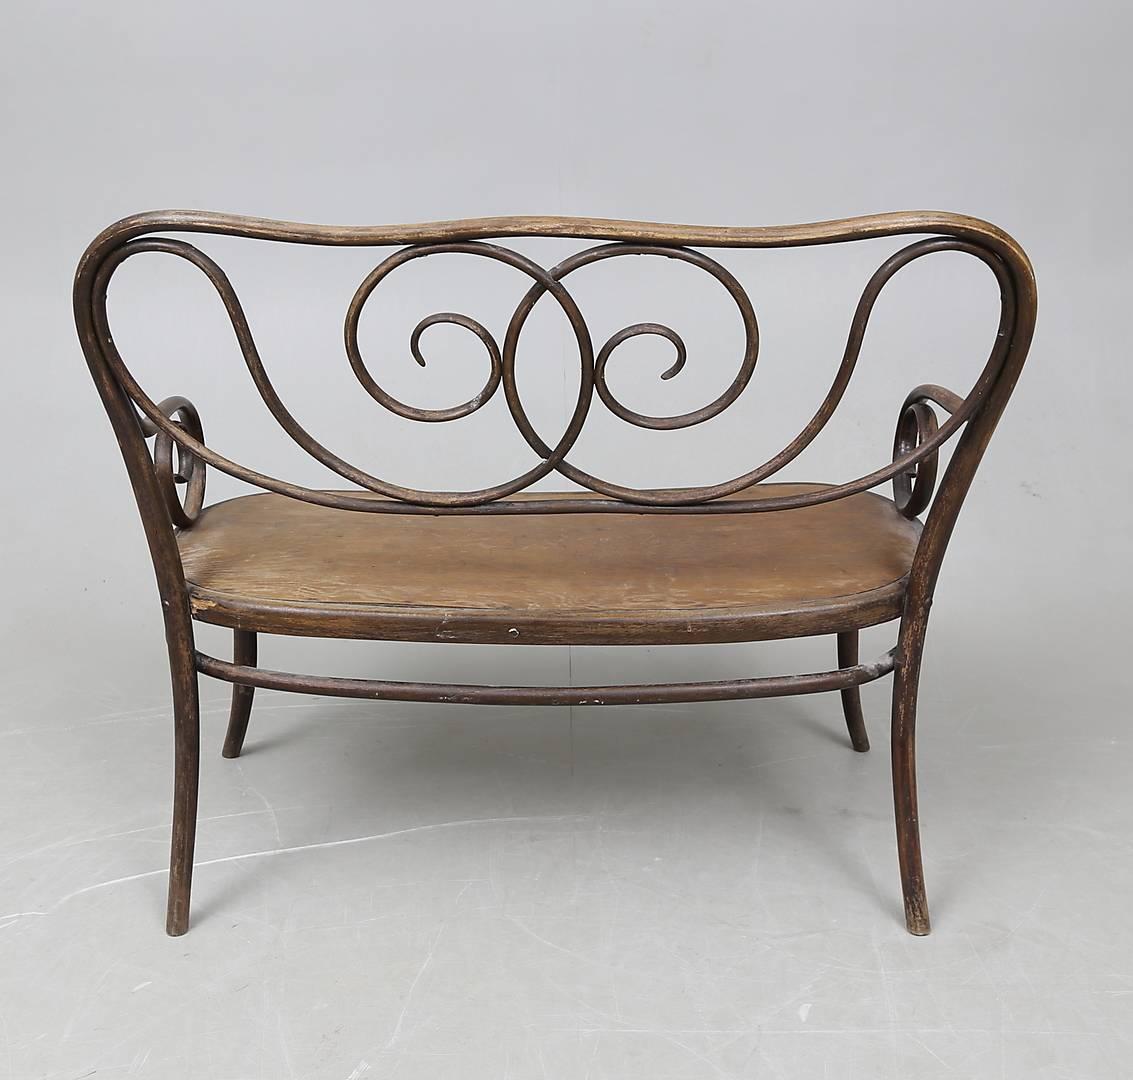 Beech bentwood construction with a caned seat (on the picture plywood) designed by August Thonet, he was the son of Michael Thonet, who in 1869 started to manage the family business. The settee from circa 1900, catalog number 1, is in a good